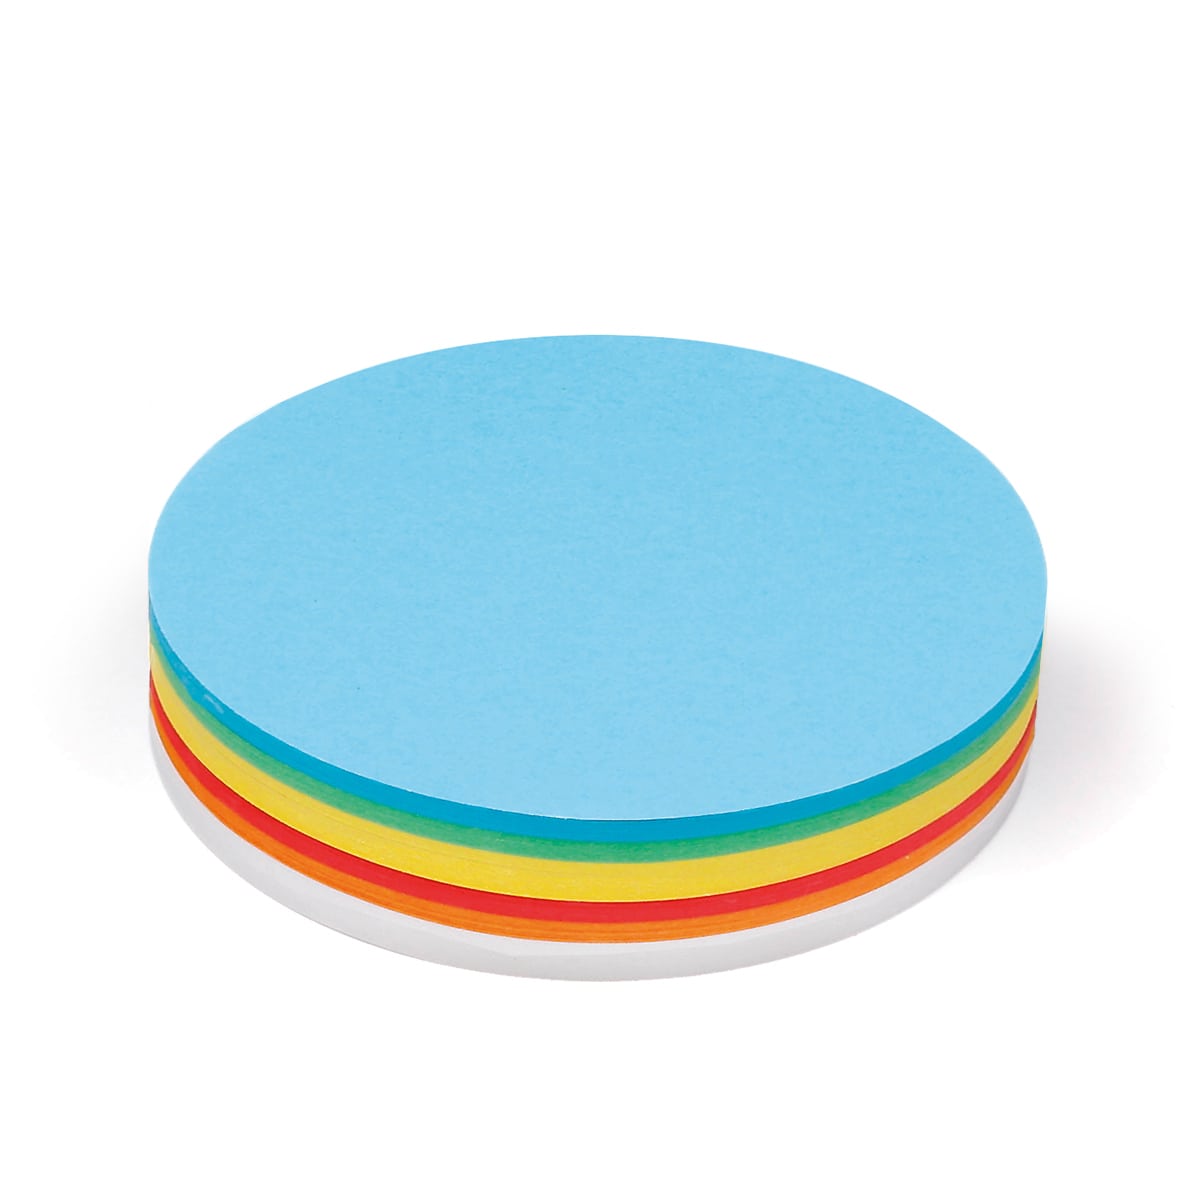 Pin-It Cards, large round, 250 sheets, assorted